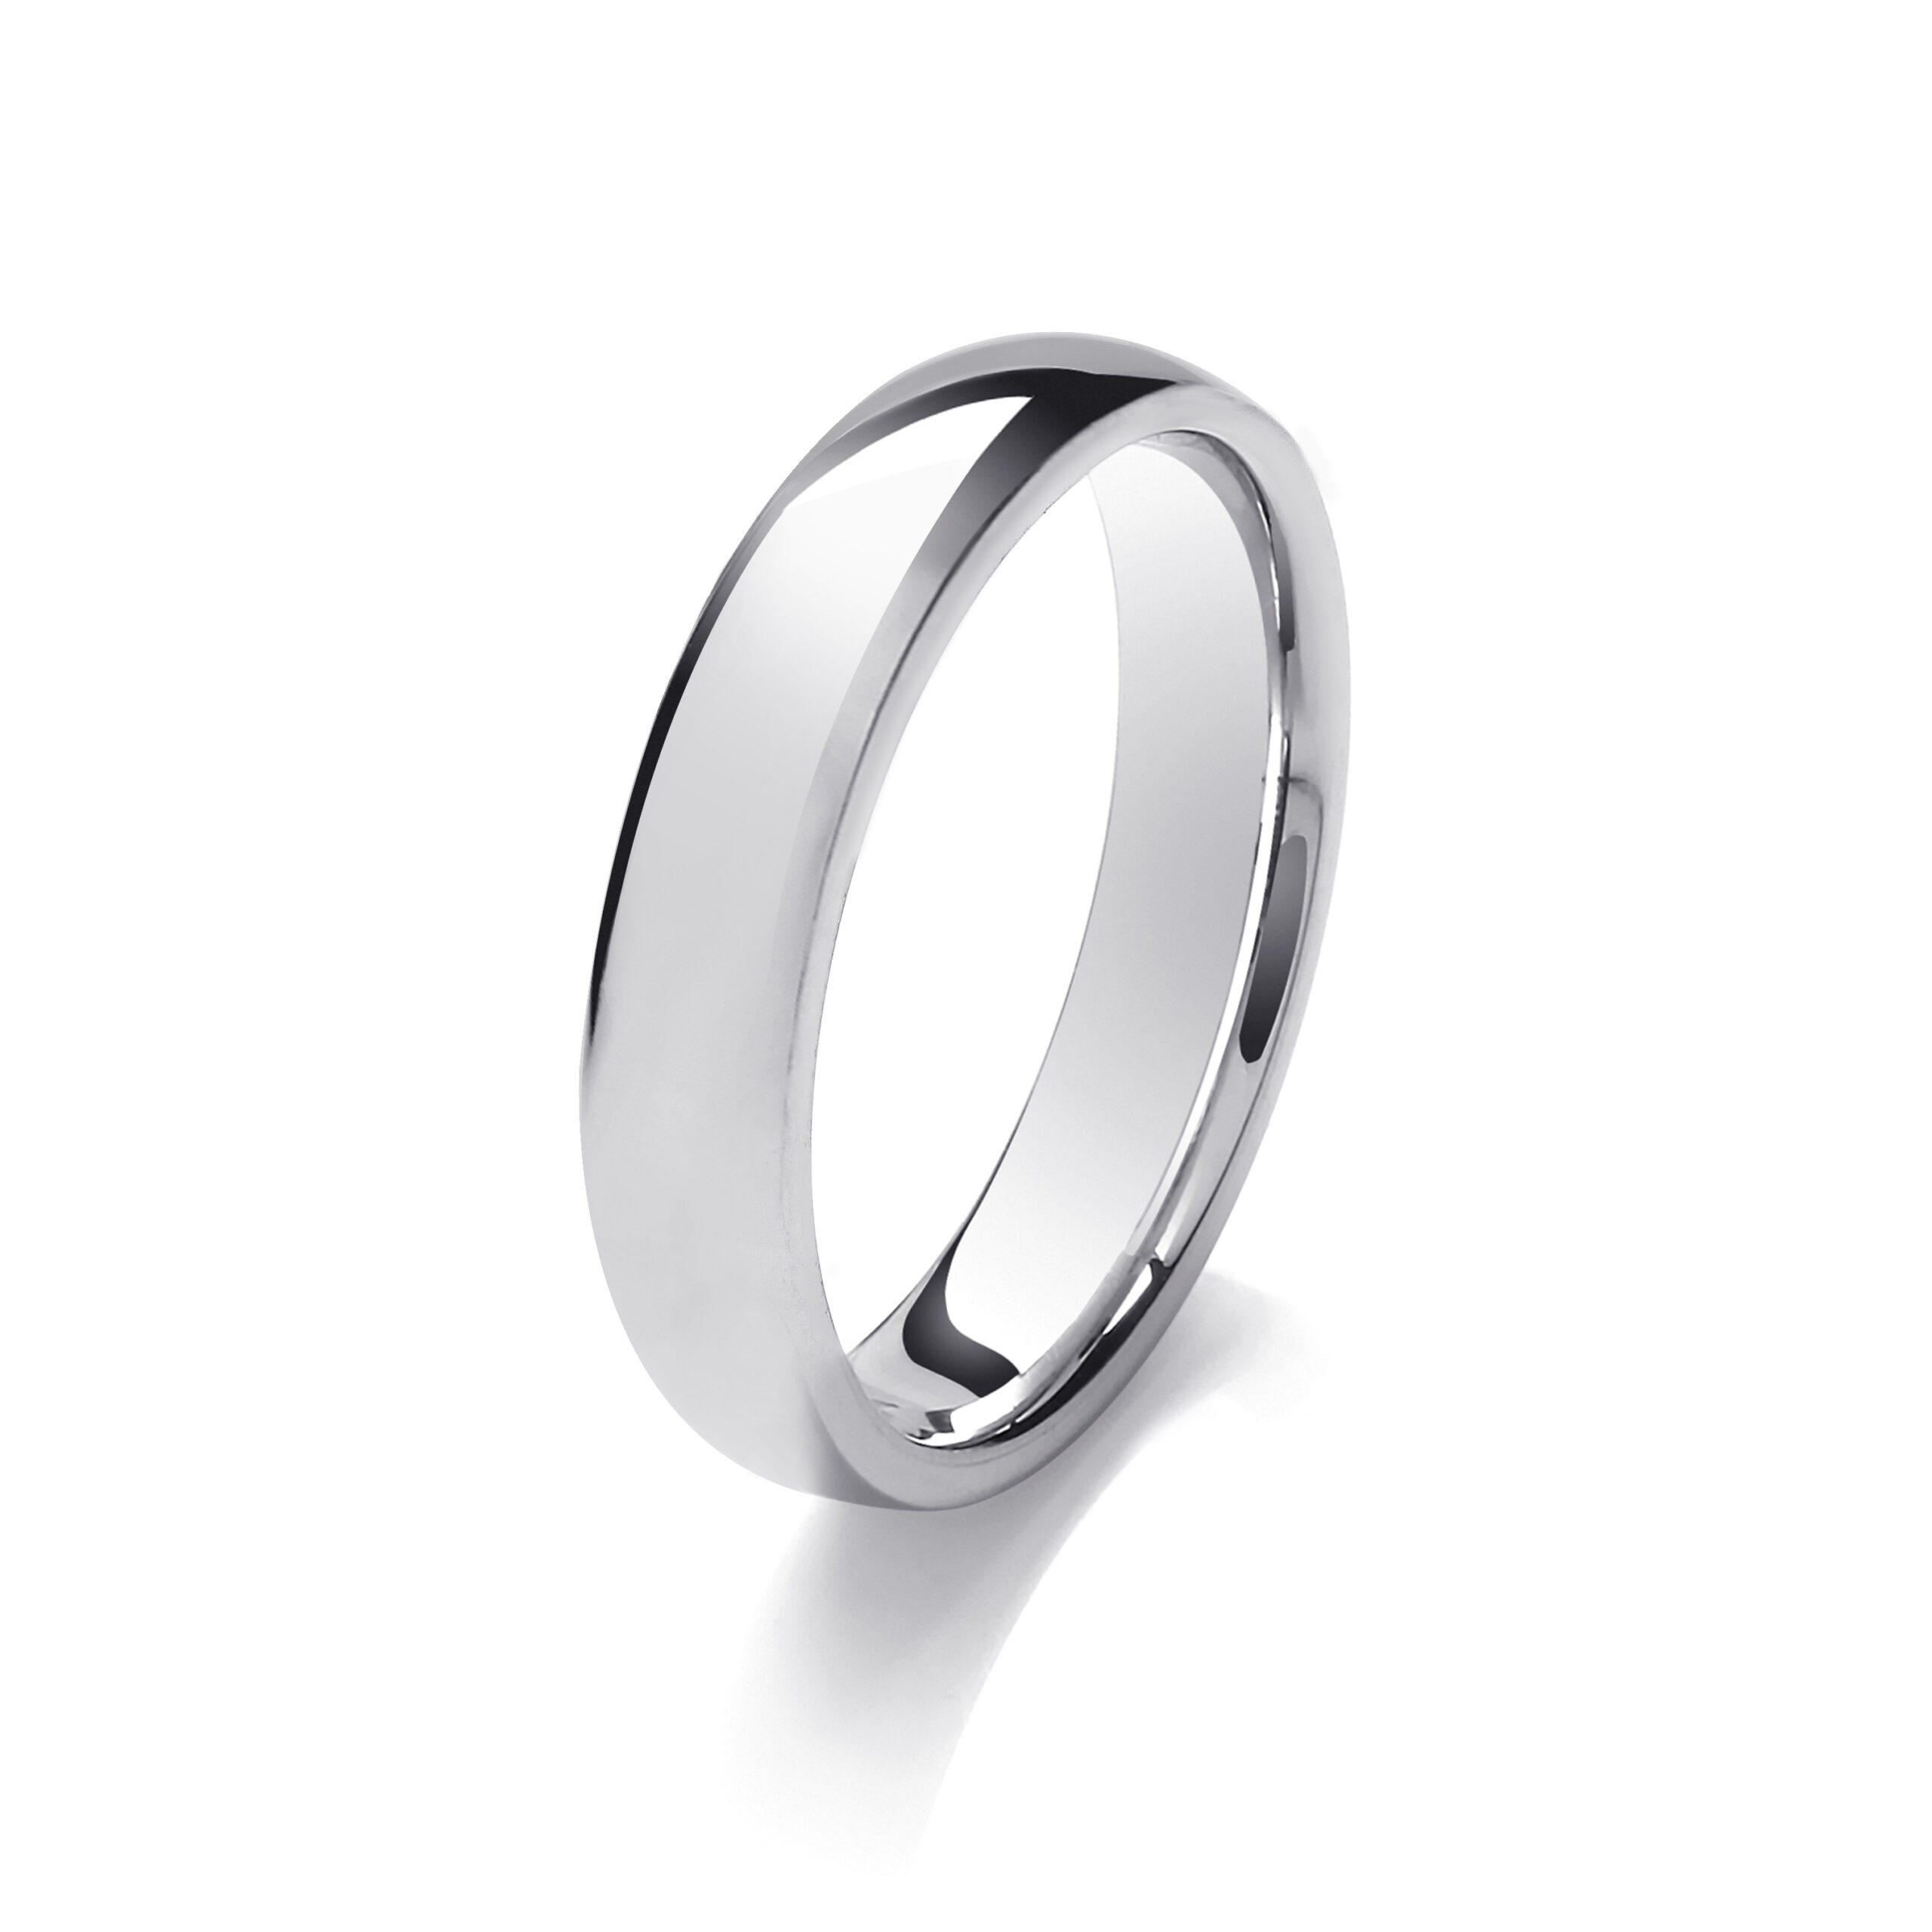 5mm white gold traditional court wedding ring